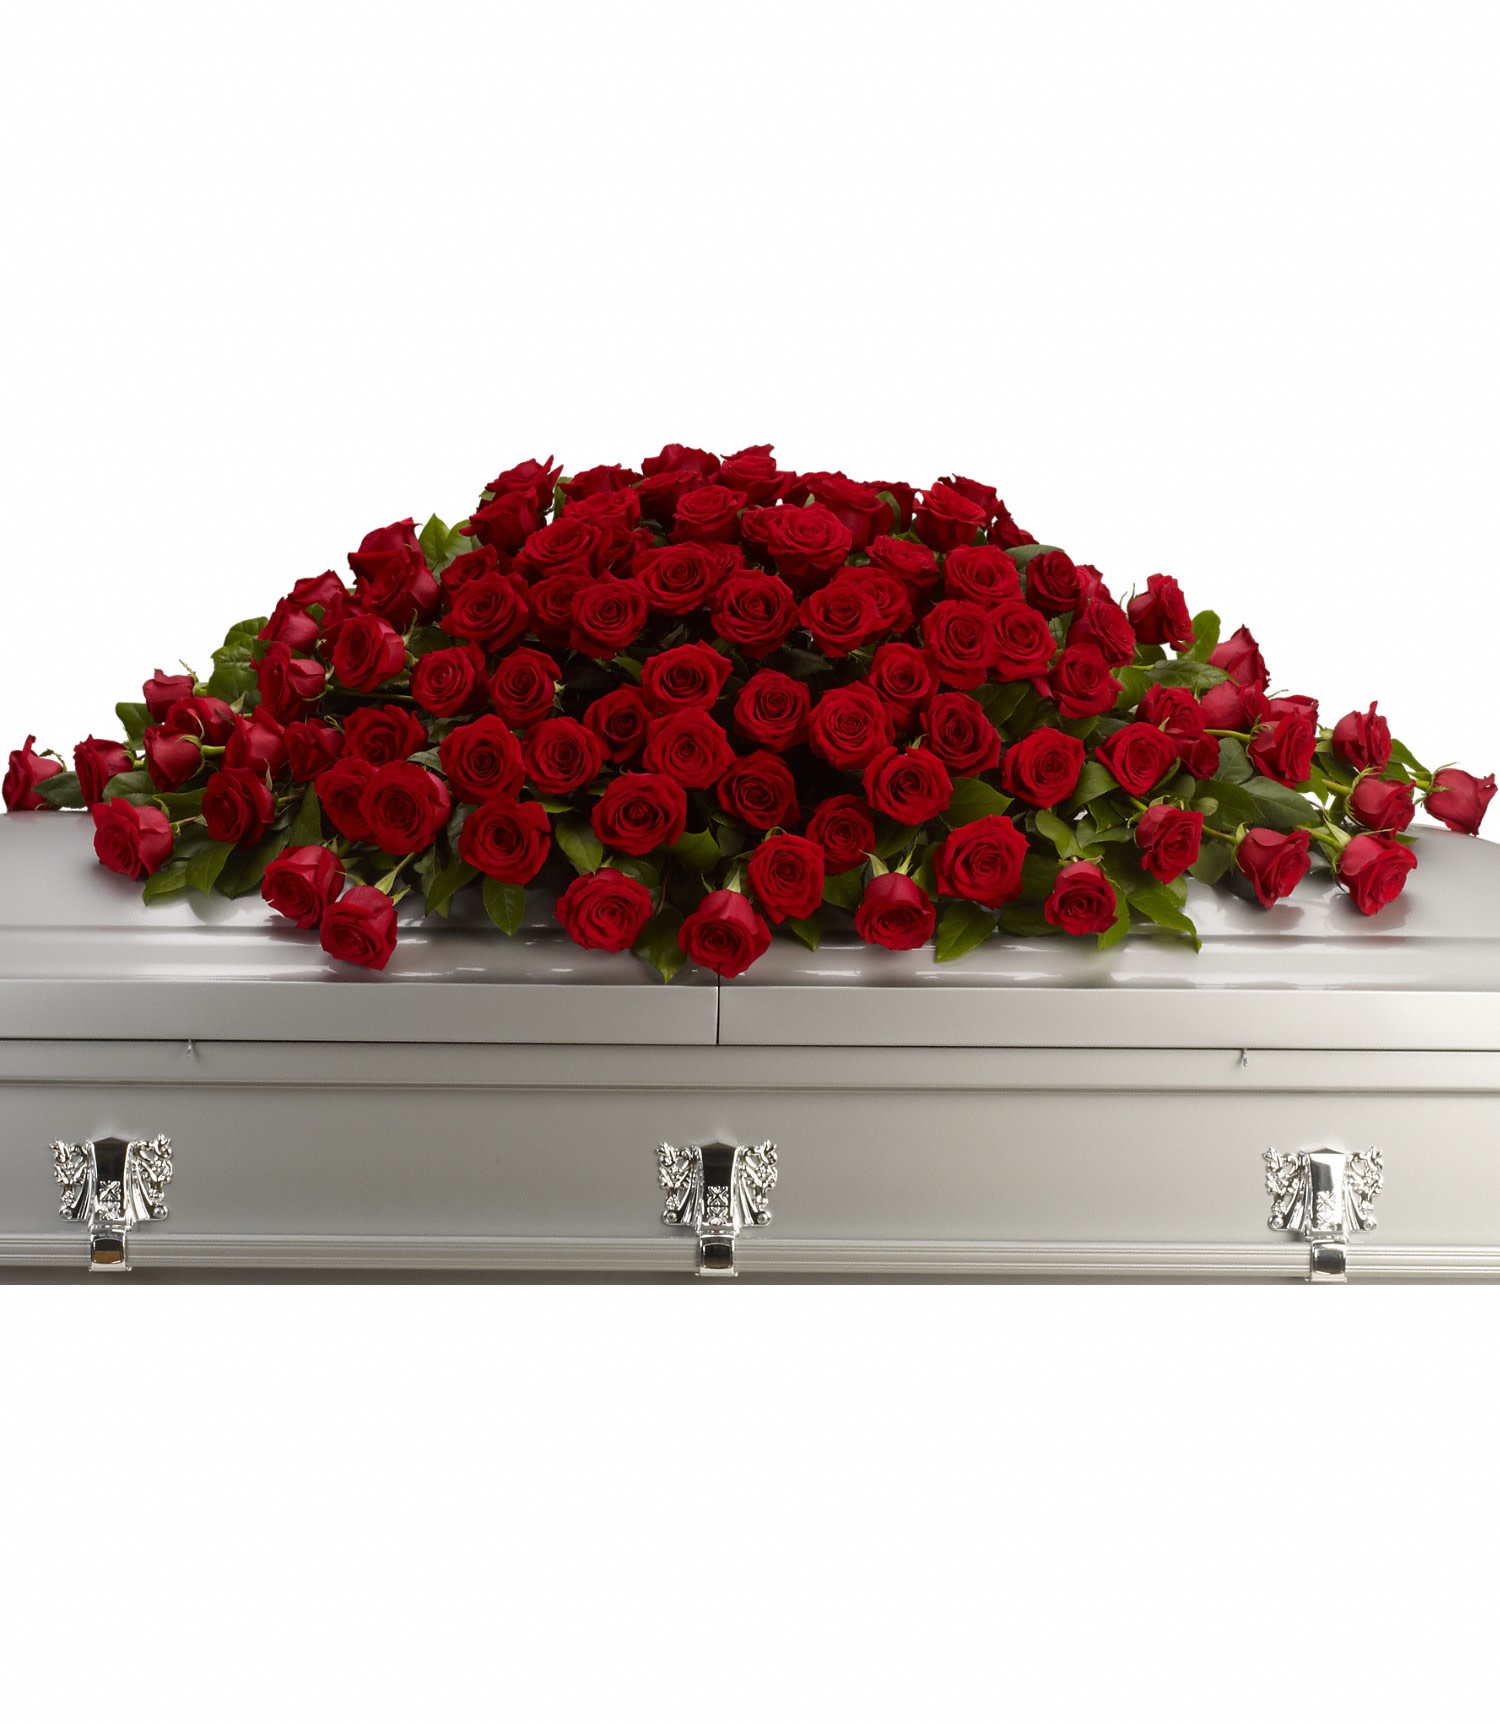 Greatest Love Rose Casket Spray - A loving embrace of rich, regal roses in an all-red spray to adorn the casket.A full spray of 100 crimson roses. Approximately 56&quot; W x 22&quot; H